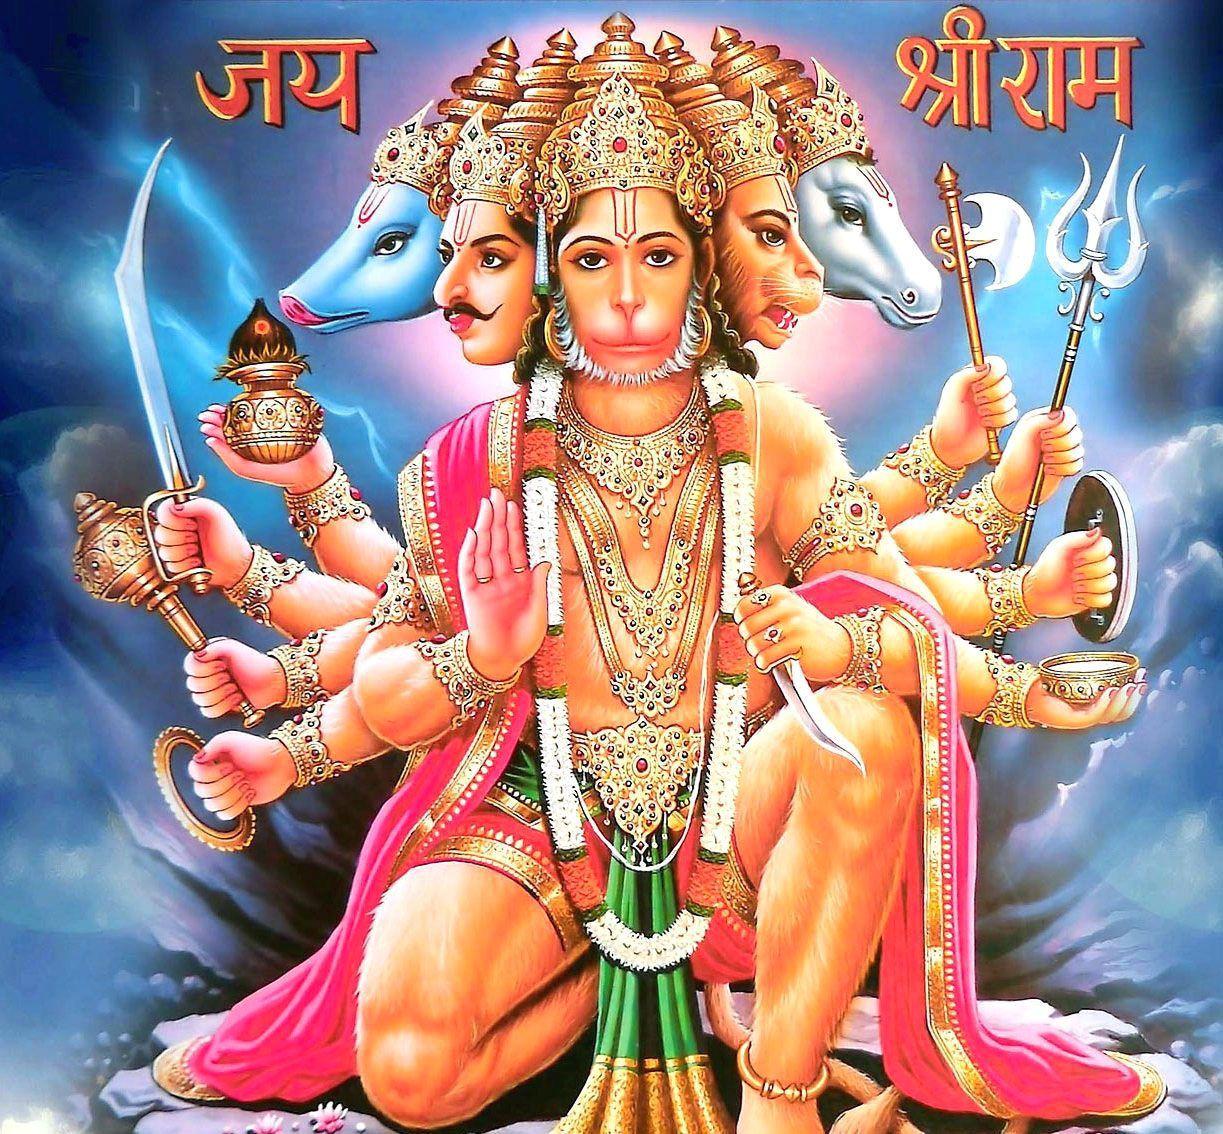 Incredible Collection of Over 999 Ram Hanuman Images in Full 4K